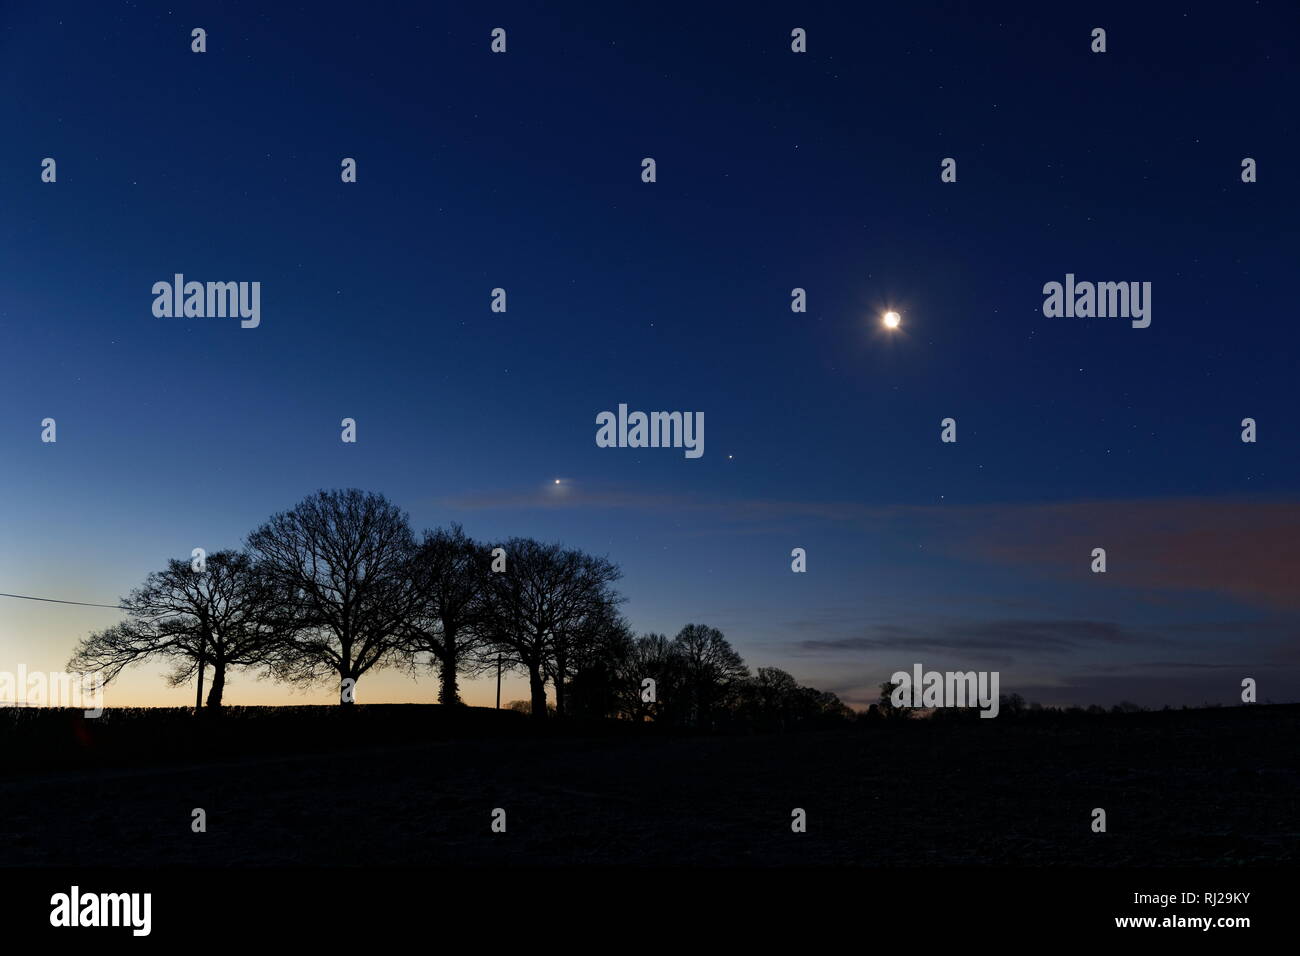 Venus jupiter and the moon shine majestically in the sky above trees silhouetted by the early dawn Oakley Hampshire Stock Photo